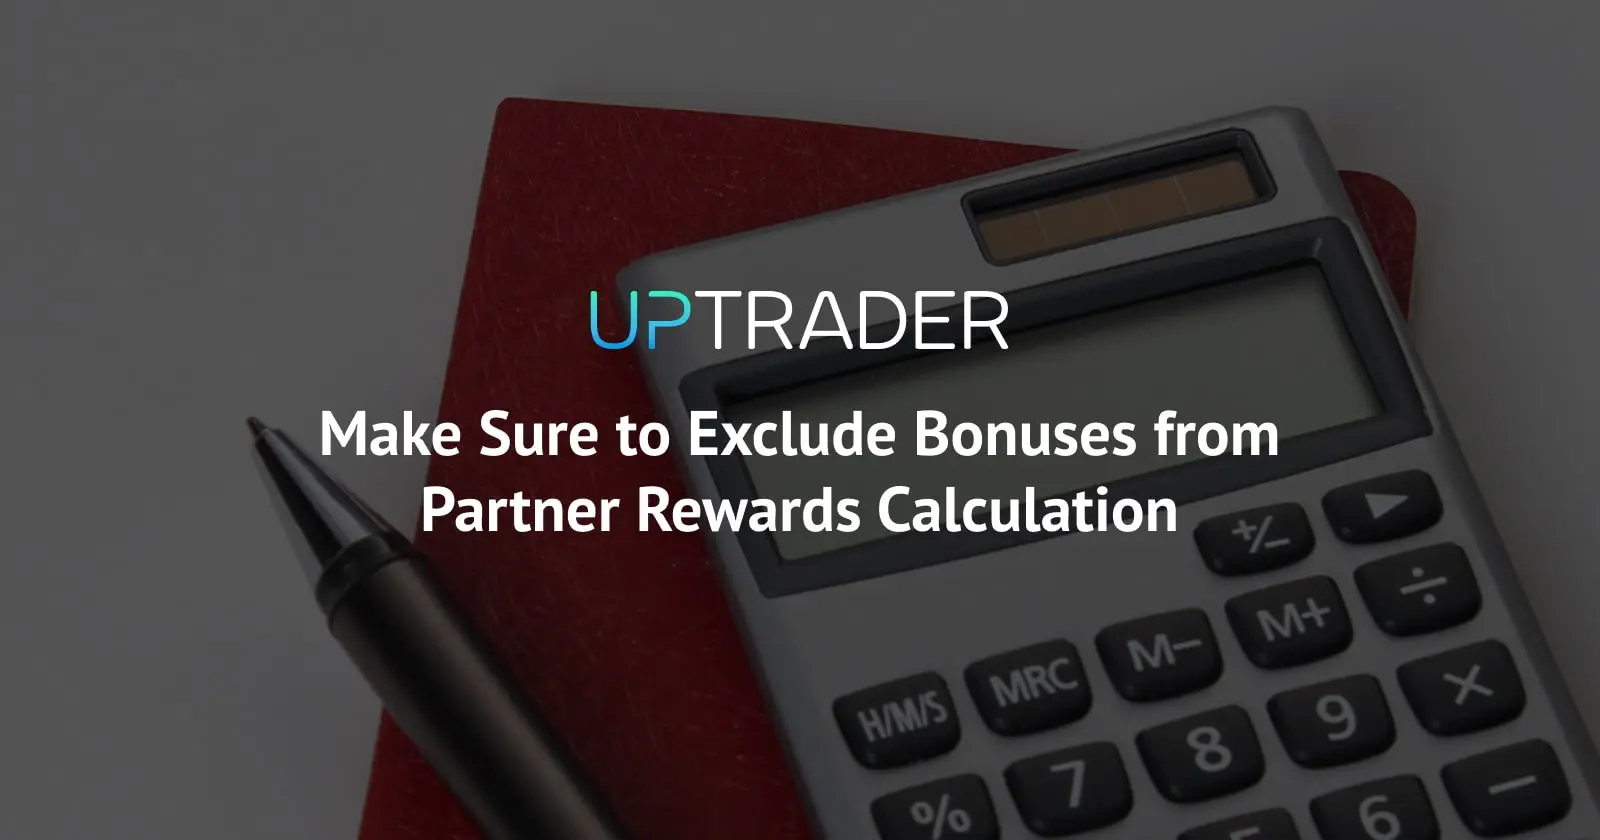 Make Sure to Exclude Bonuses from Partner Rewards Calculation